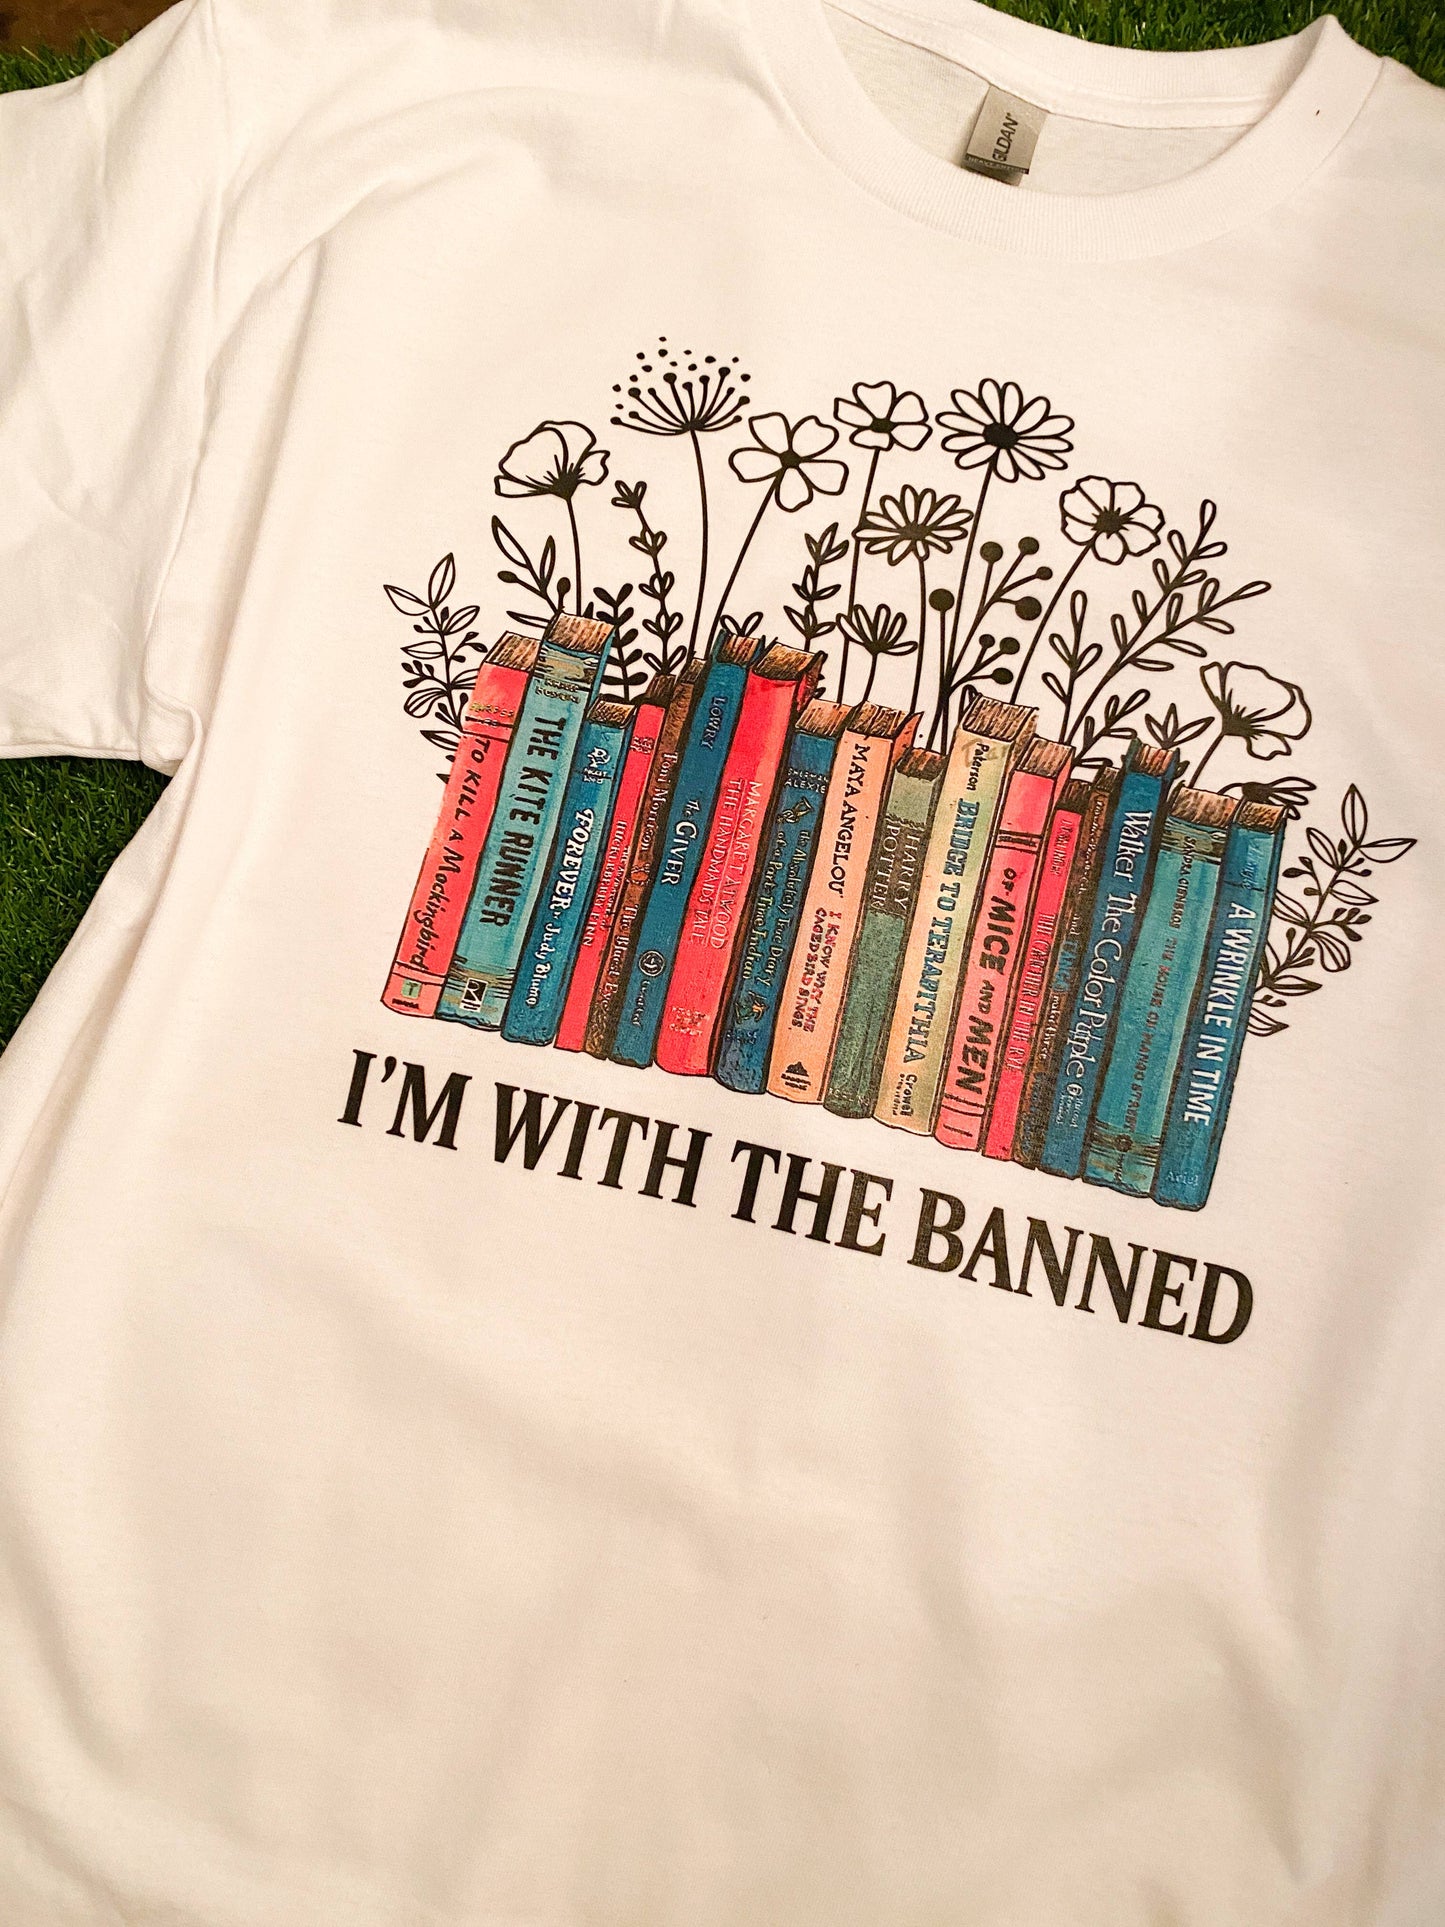 Medium - I'm with the BANNED graphic tee